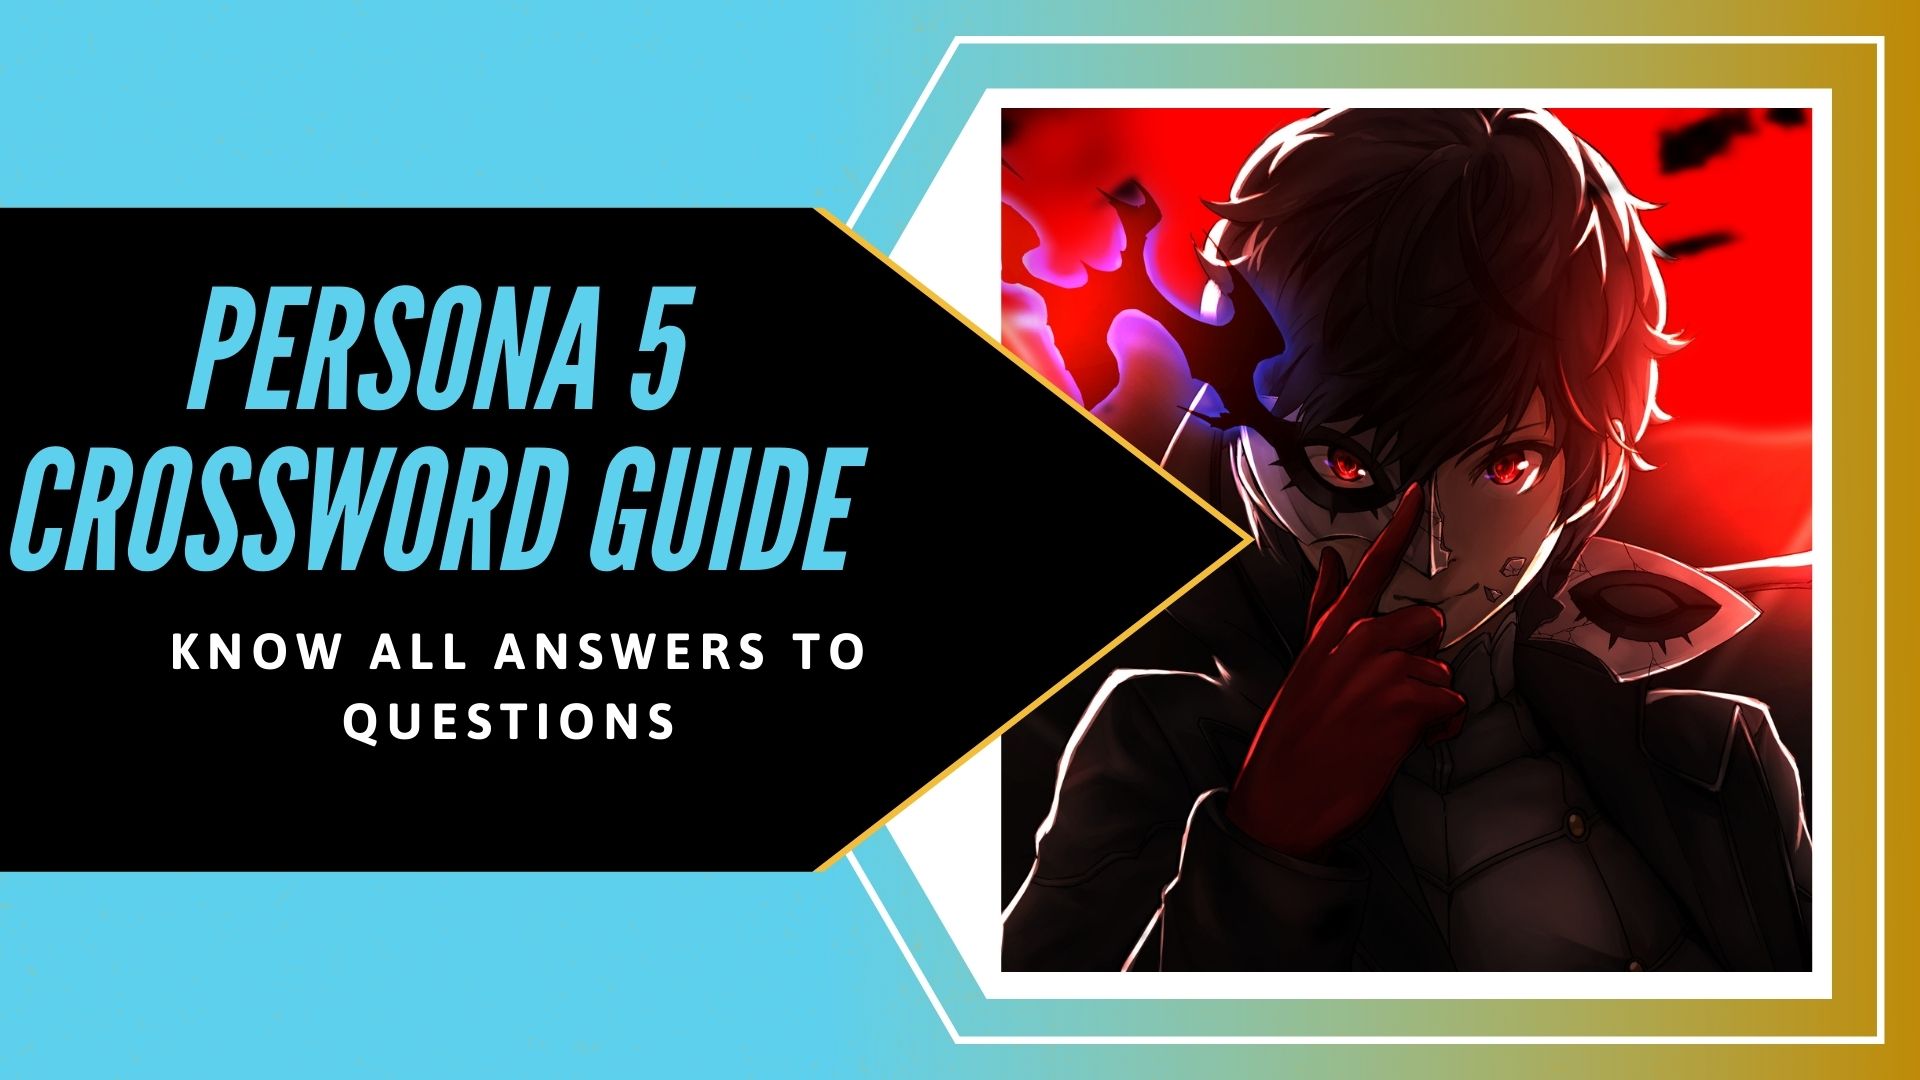 Persona 5 Crossword: All Question And Answers eXputer com